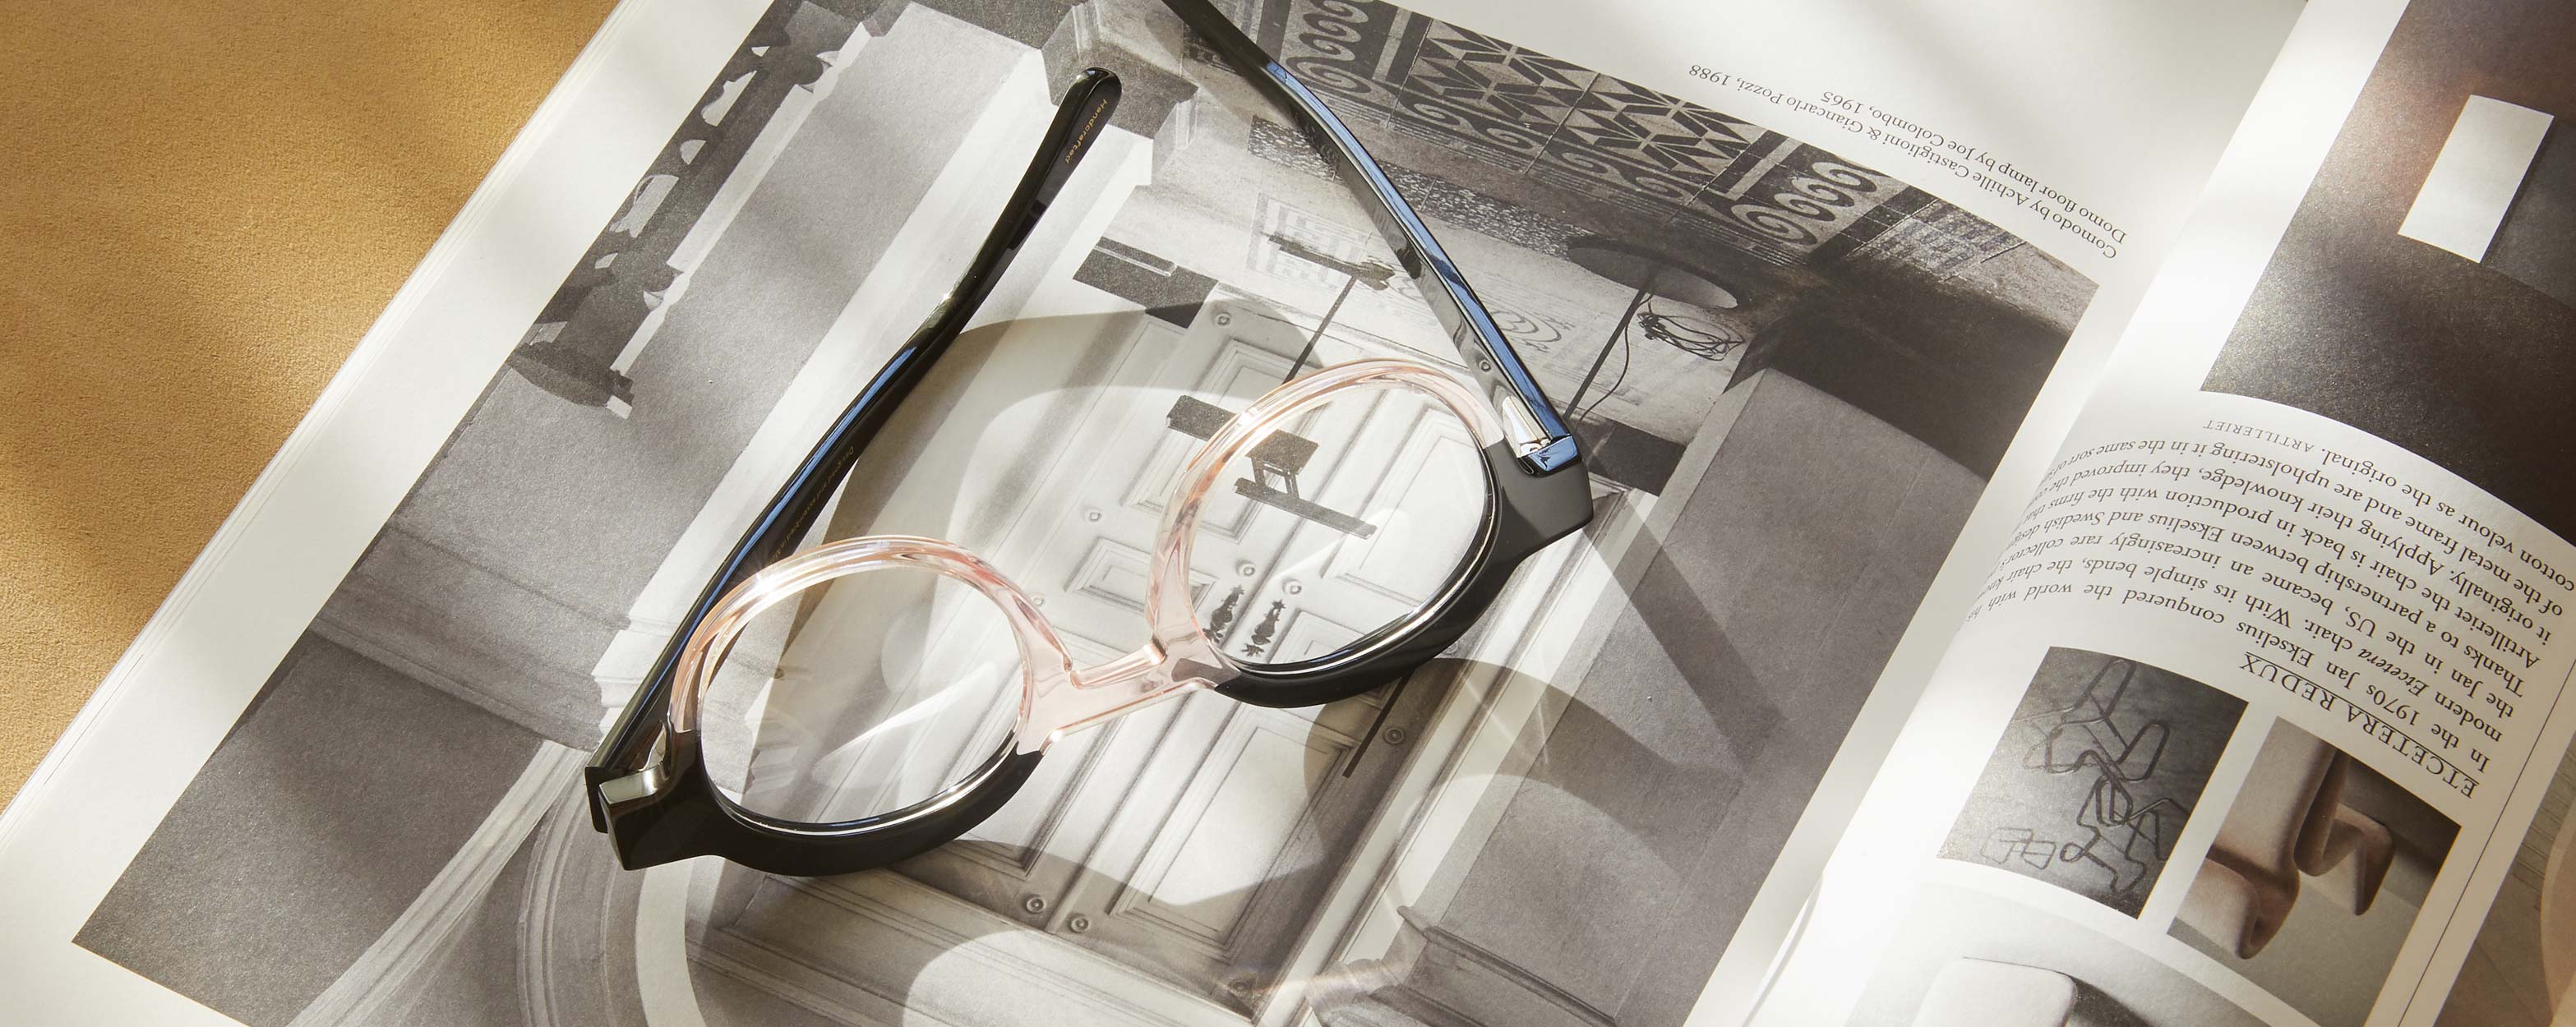 Photo Details of Charlotte Cyan & Light Tortoise Reading Glasses in a room